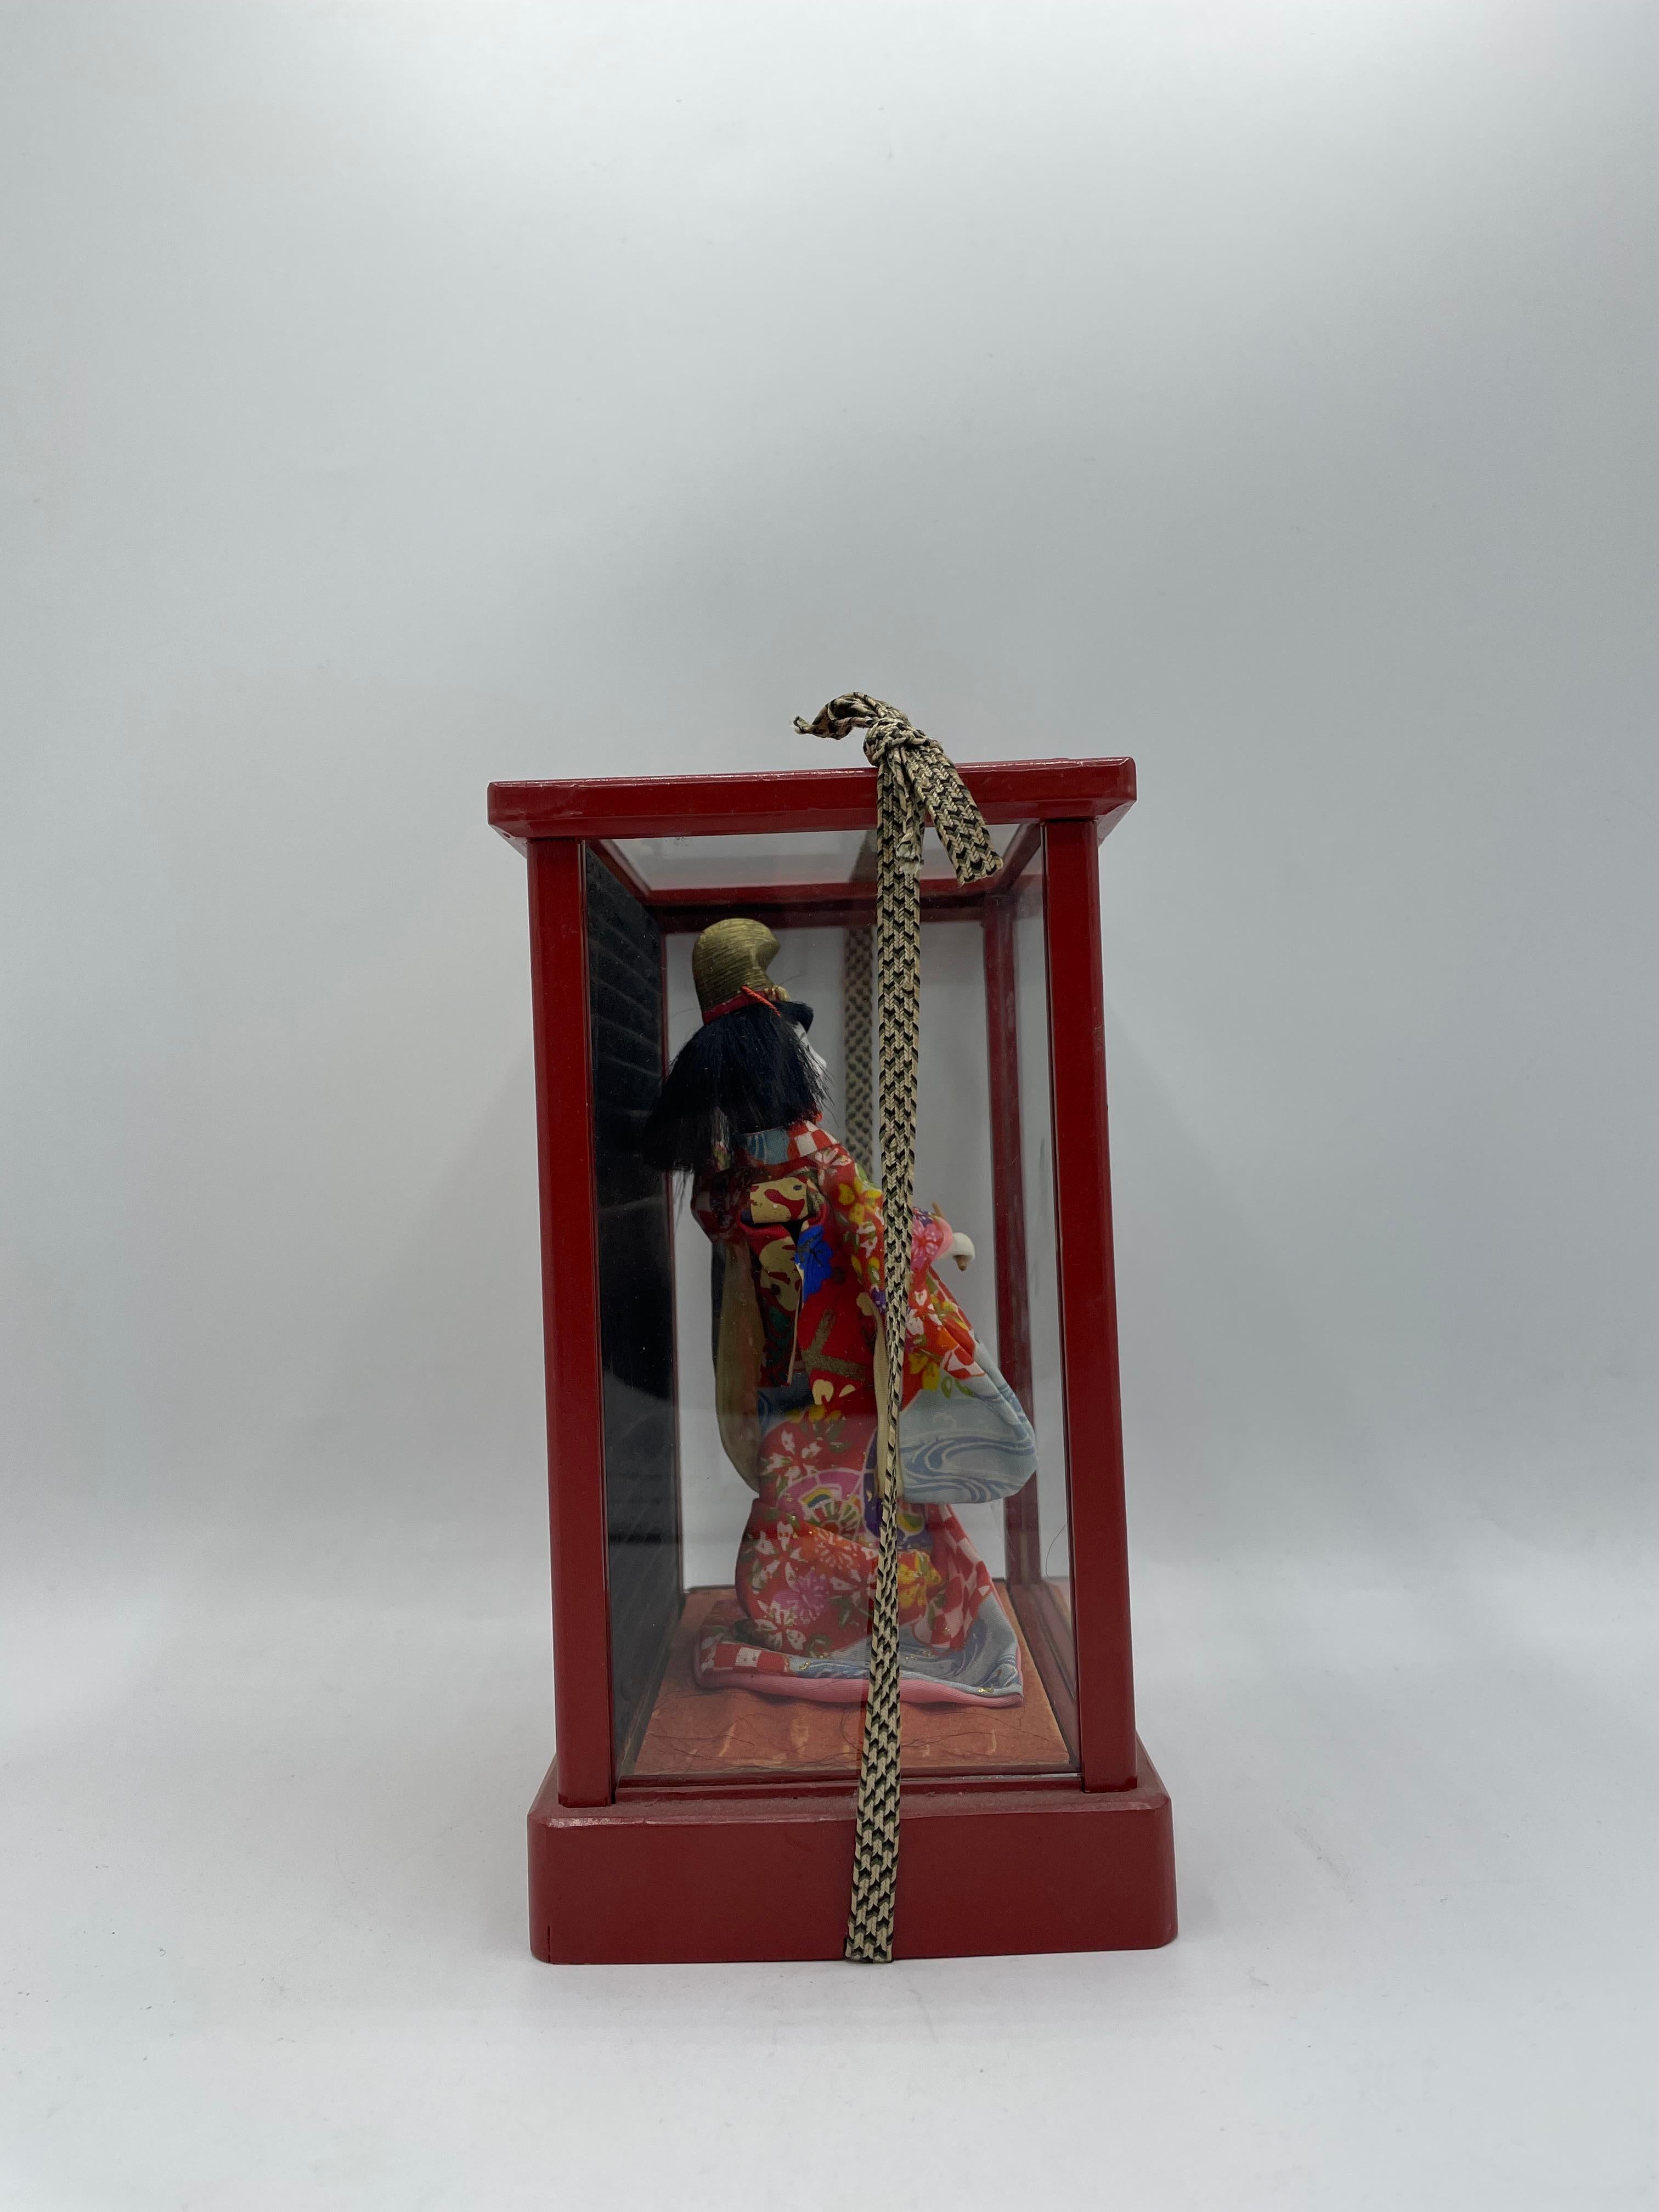 Japanese Traditional Girl Doll in a Box 1970s   In Fair Condition For Sale In Paris, FR